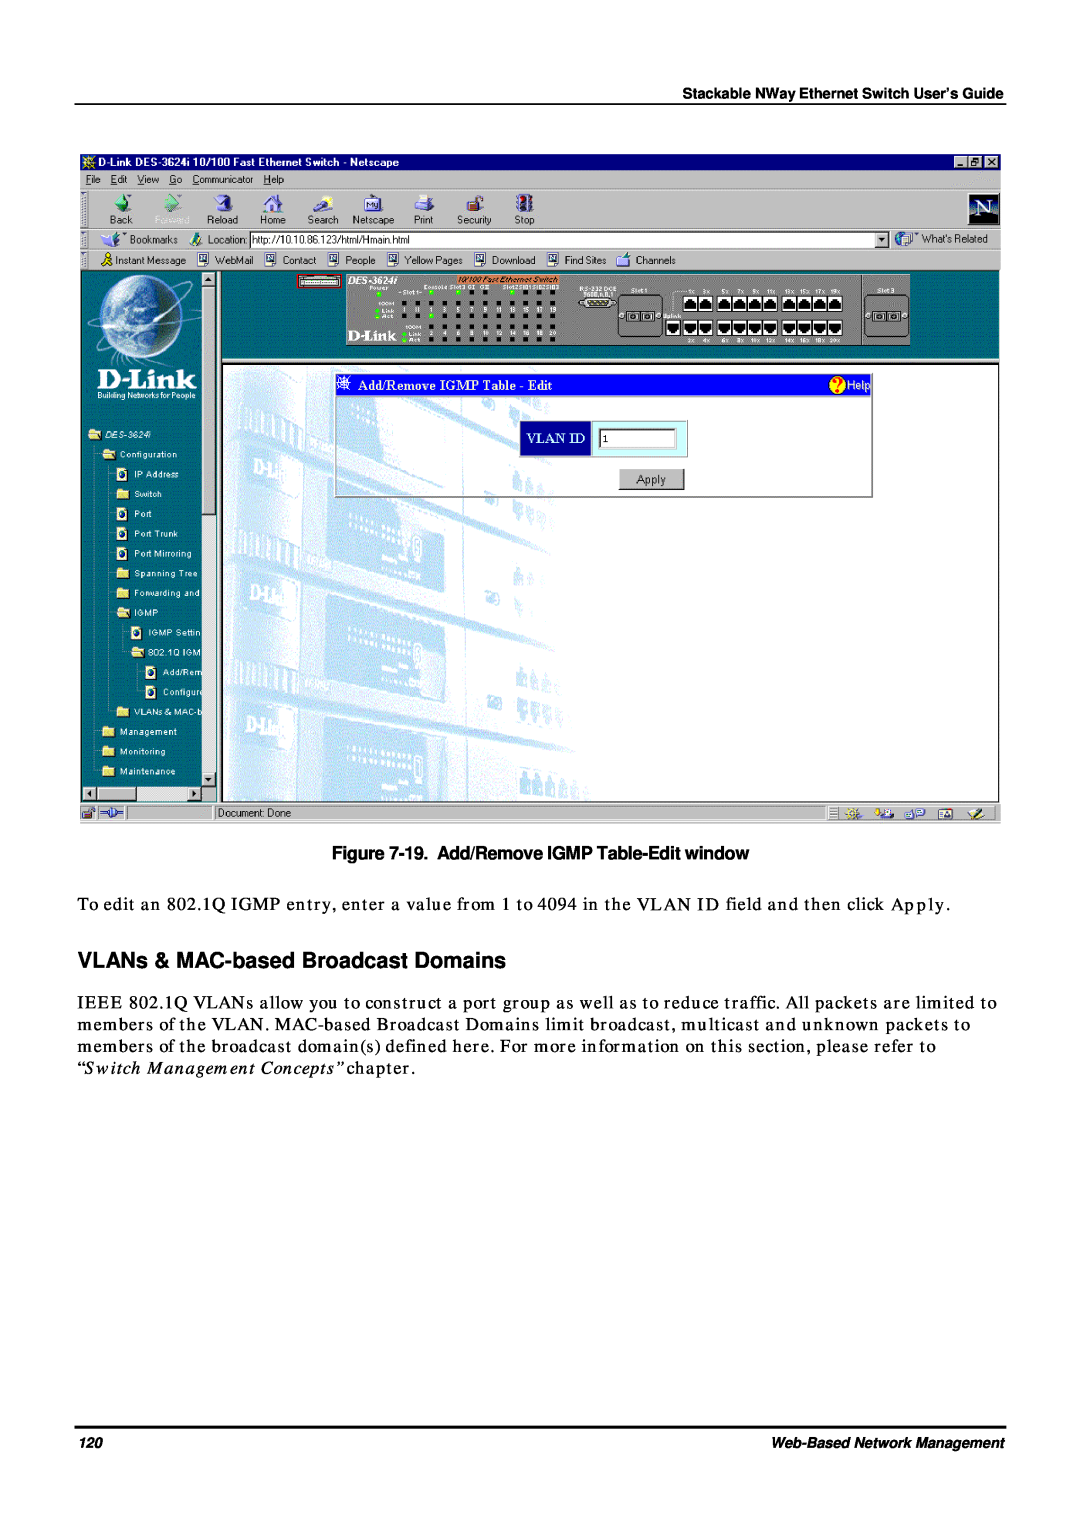 D-Link DES-3624 manual VLANs & MAC-based Broadcast Domains, 19. Add/Remove IGMP Table-Edit window 